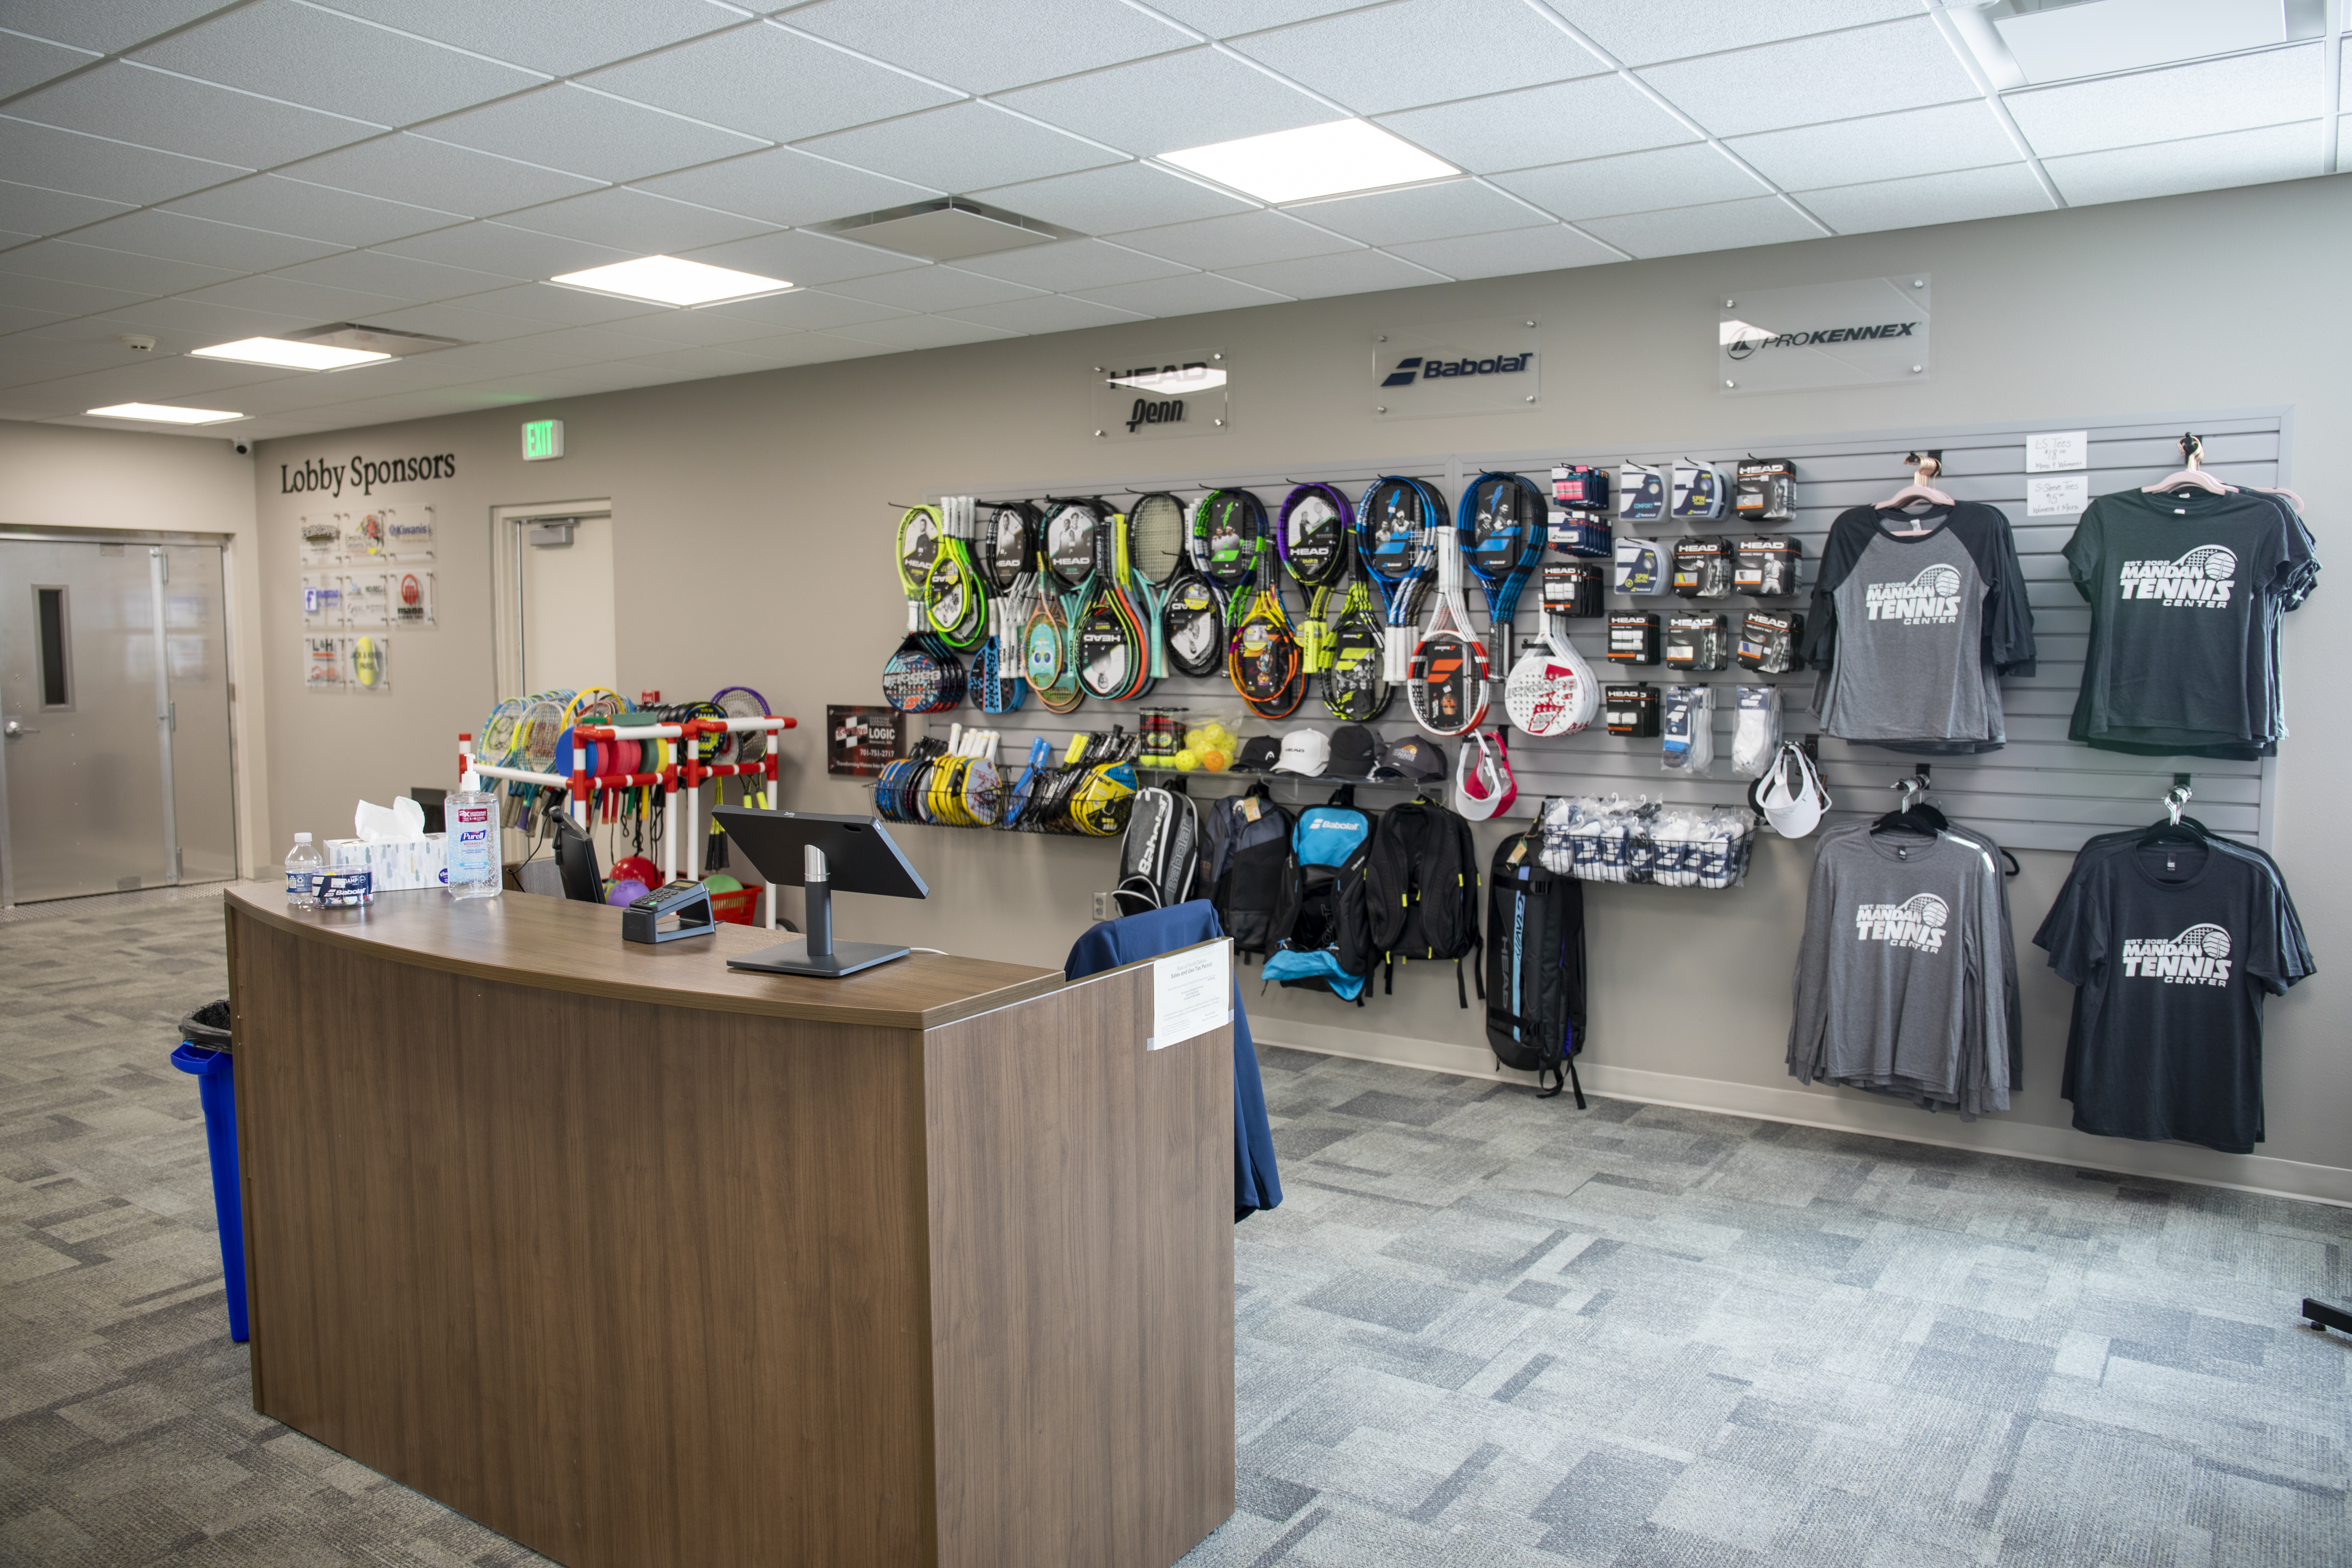 The Welcome Center of the facility features a retail area, meeting room, and equipment area. 